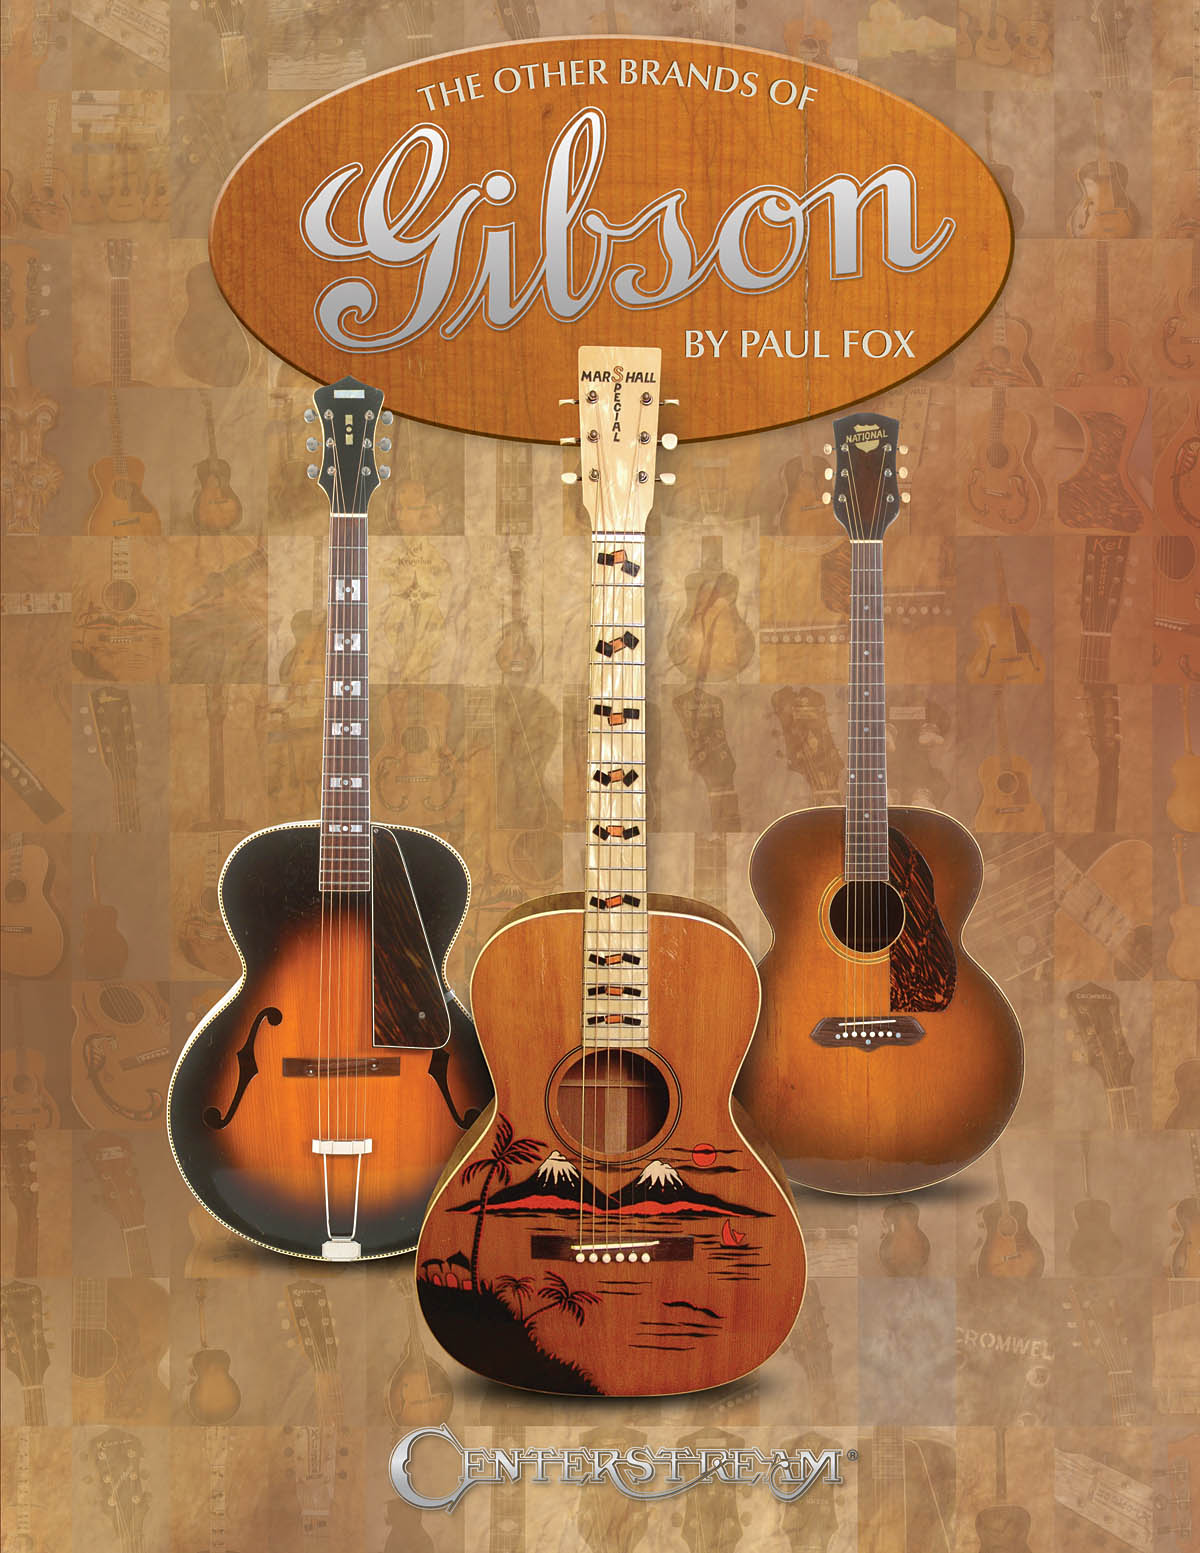 The Other Brands of Gibson: Reference Books